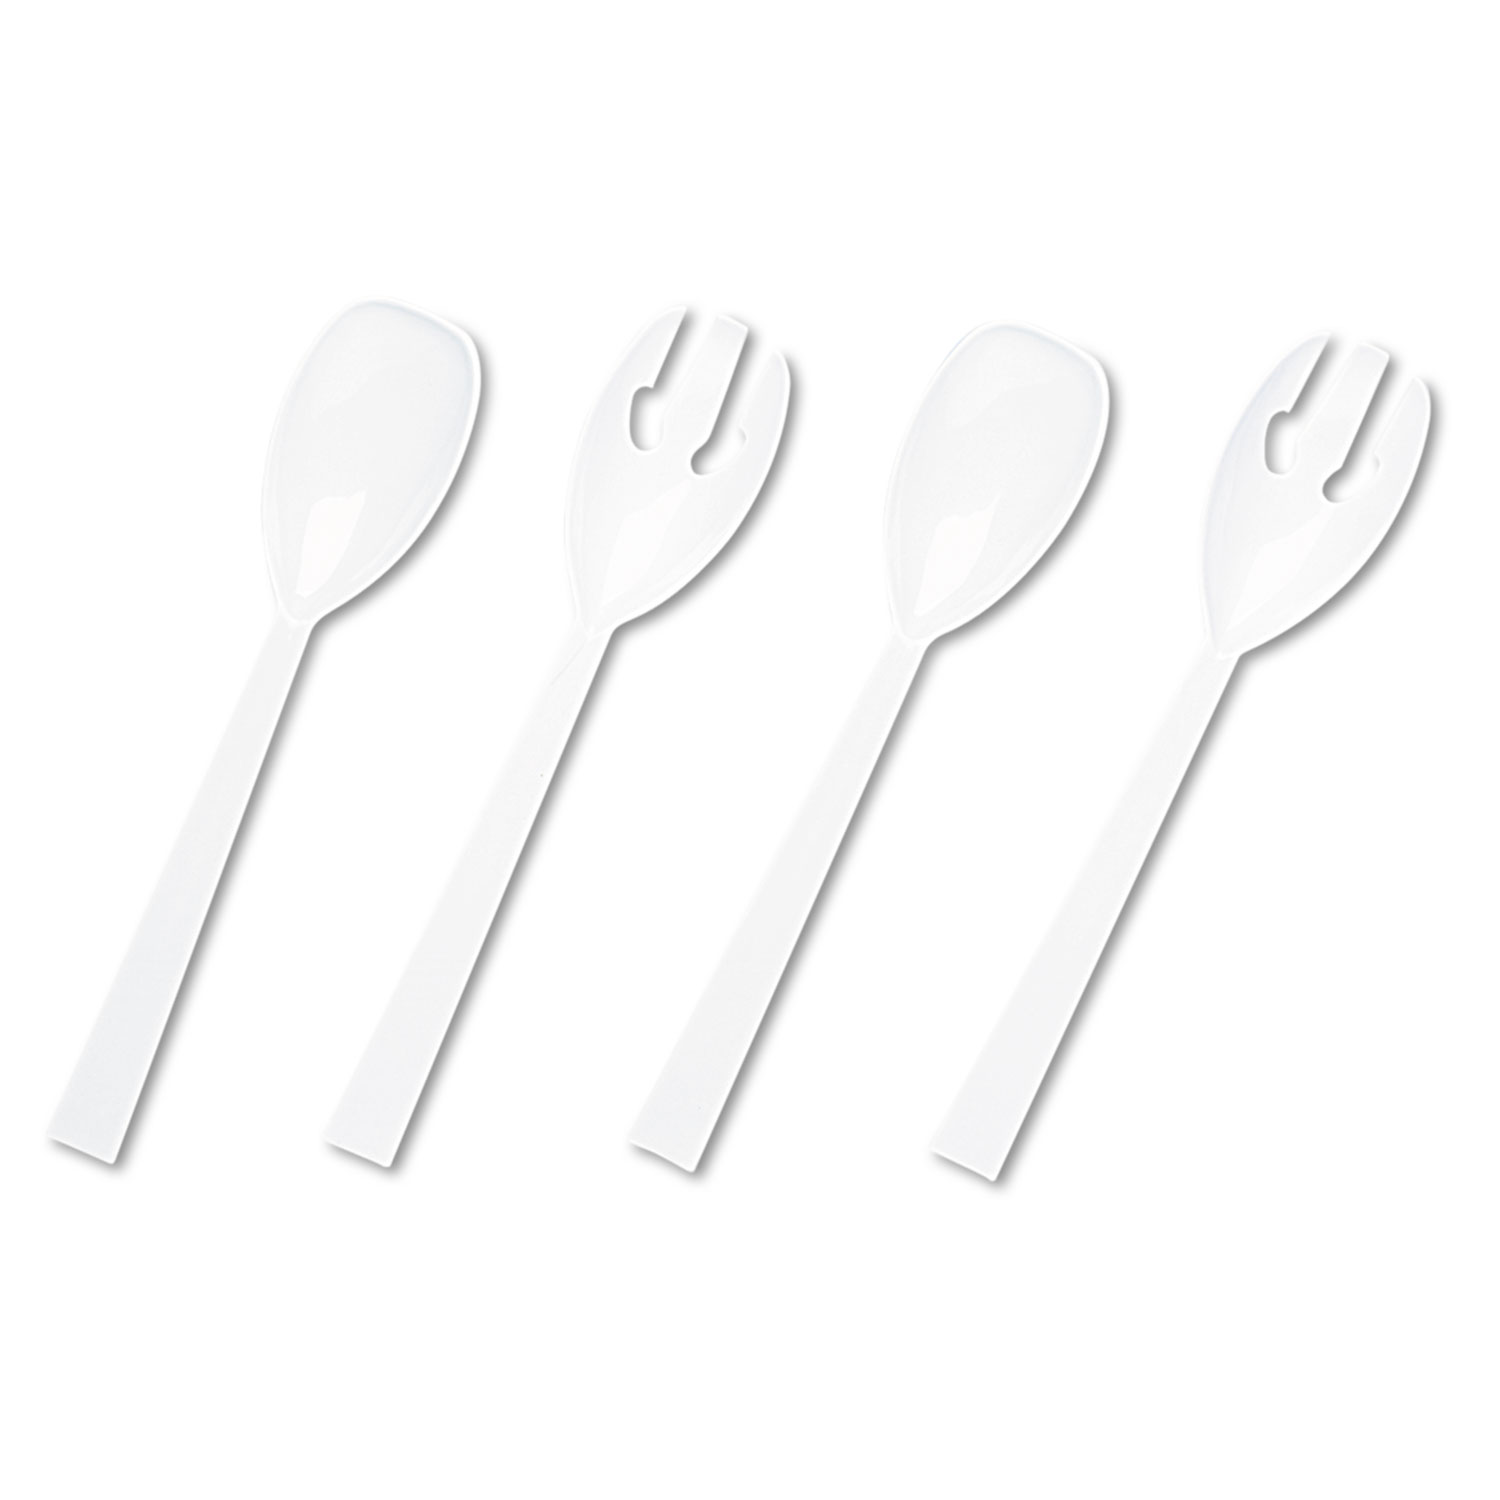  Tablemate W95PK4 Table Set Plastic Serving Forks & Spoons, White, 24 Forks, 24 Spoons per Pack (TBLW95PK4) 